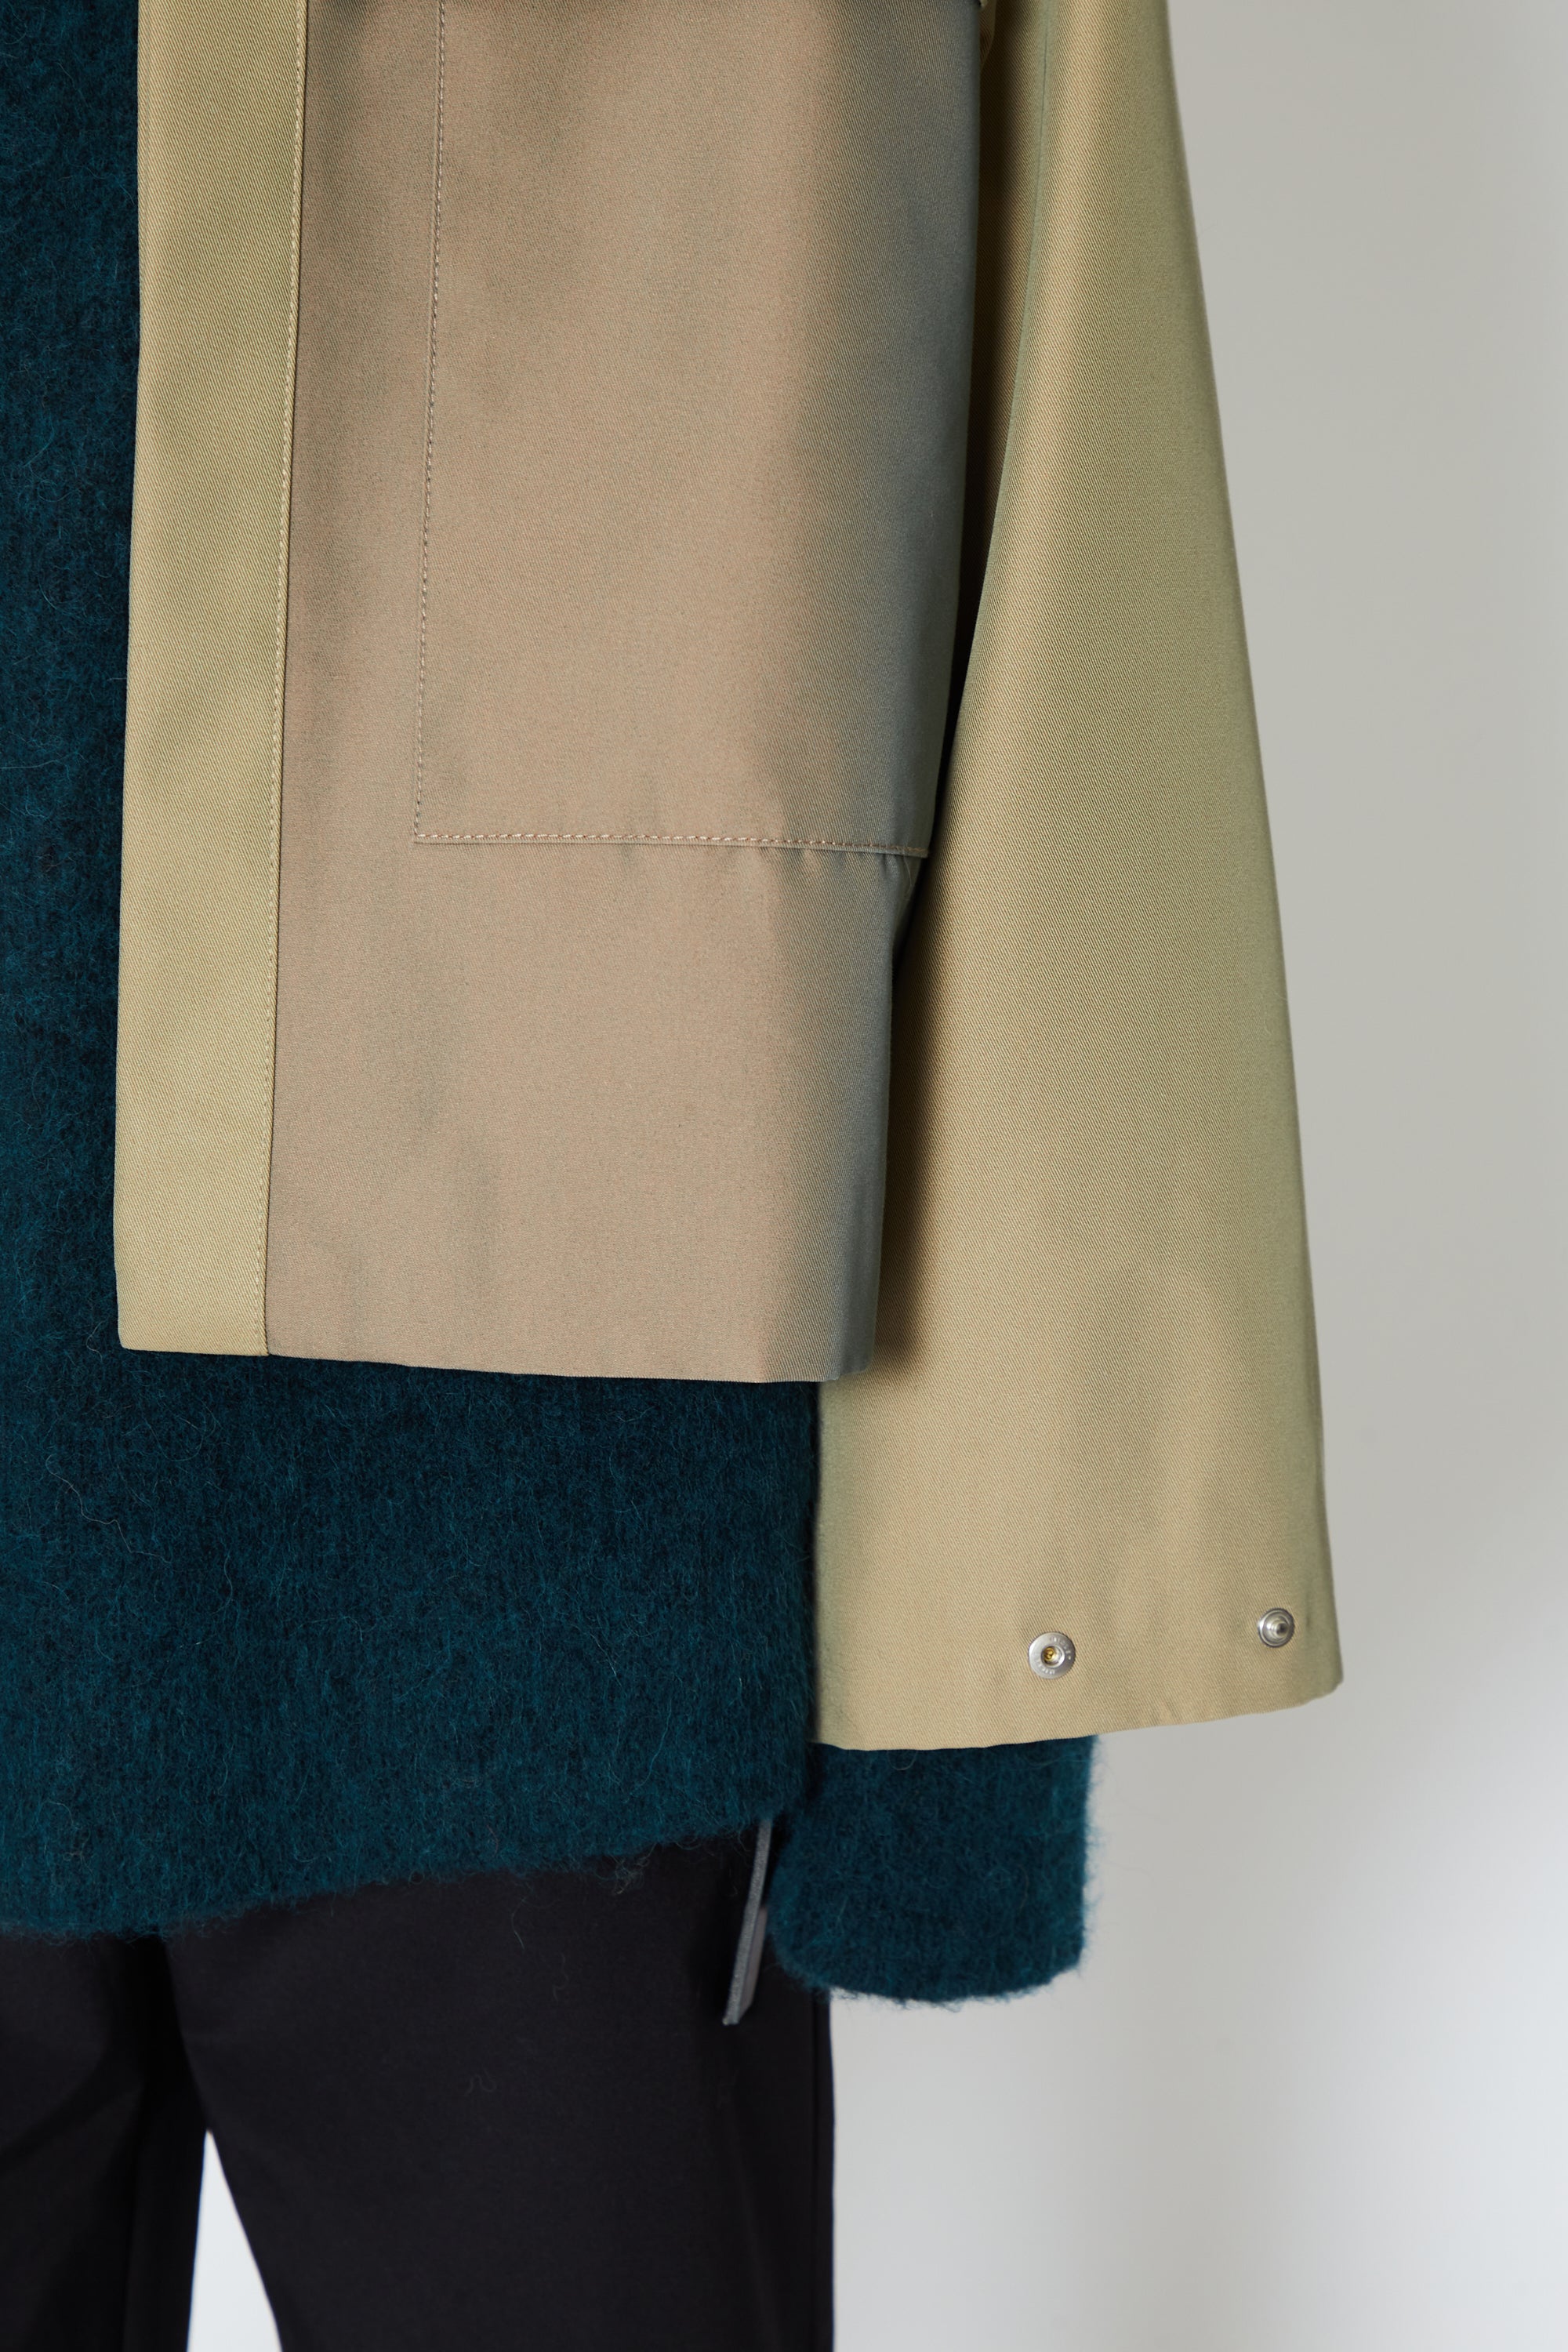 Load image into Gallery viewer, KHAKI AND BROWN GABARDINE SILO JACKET
